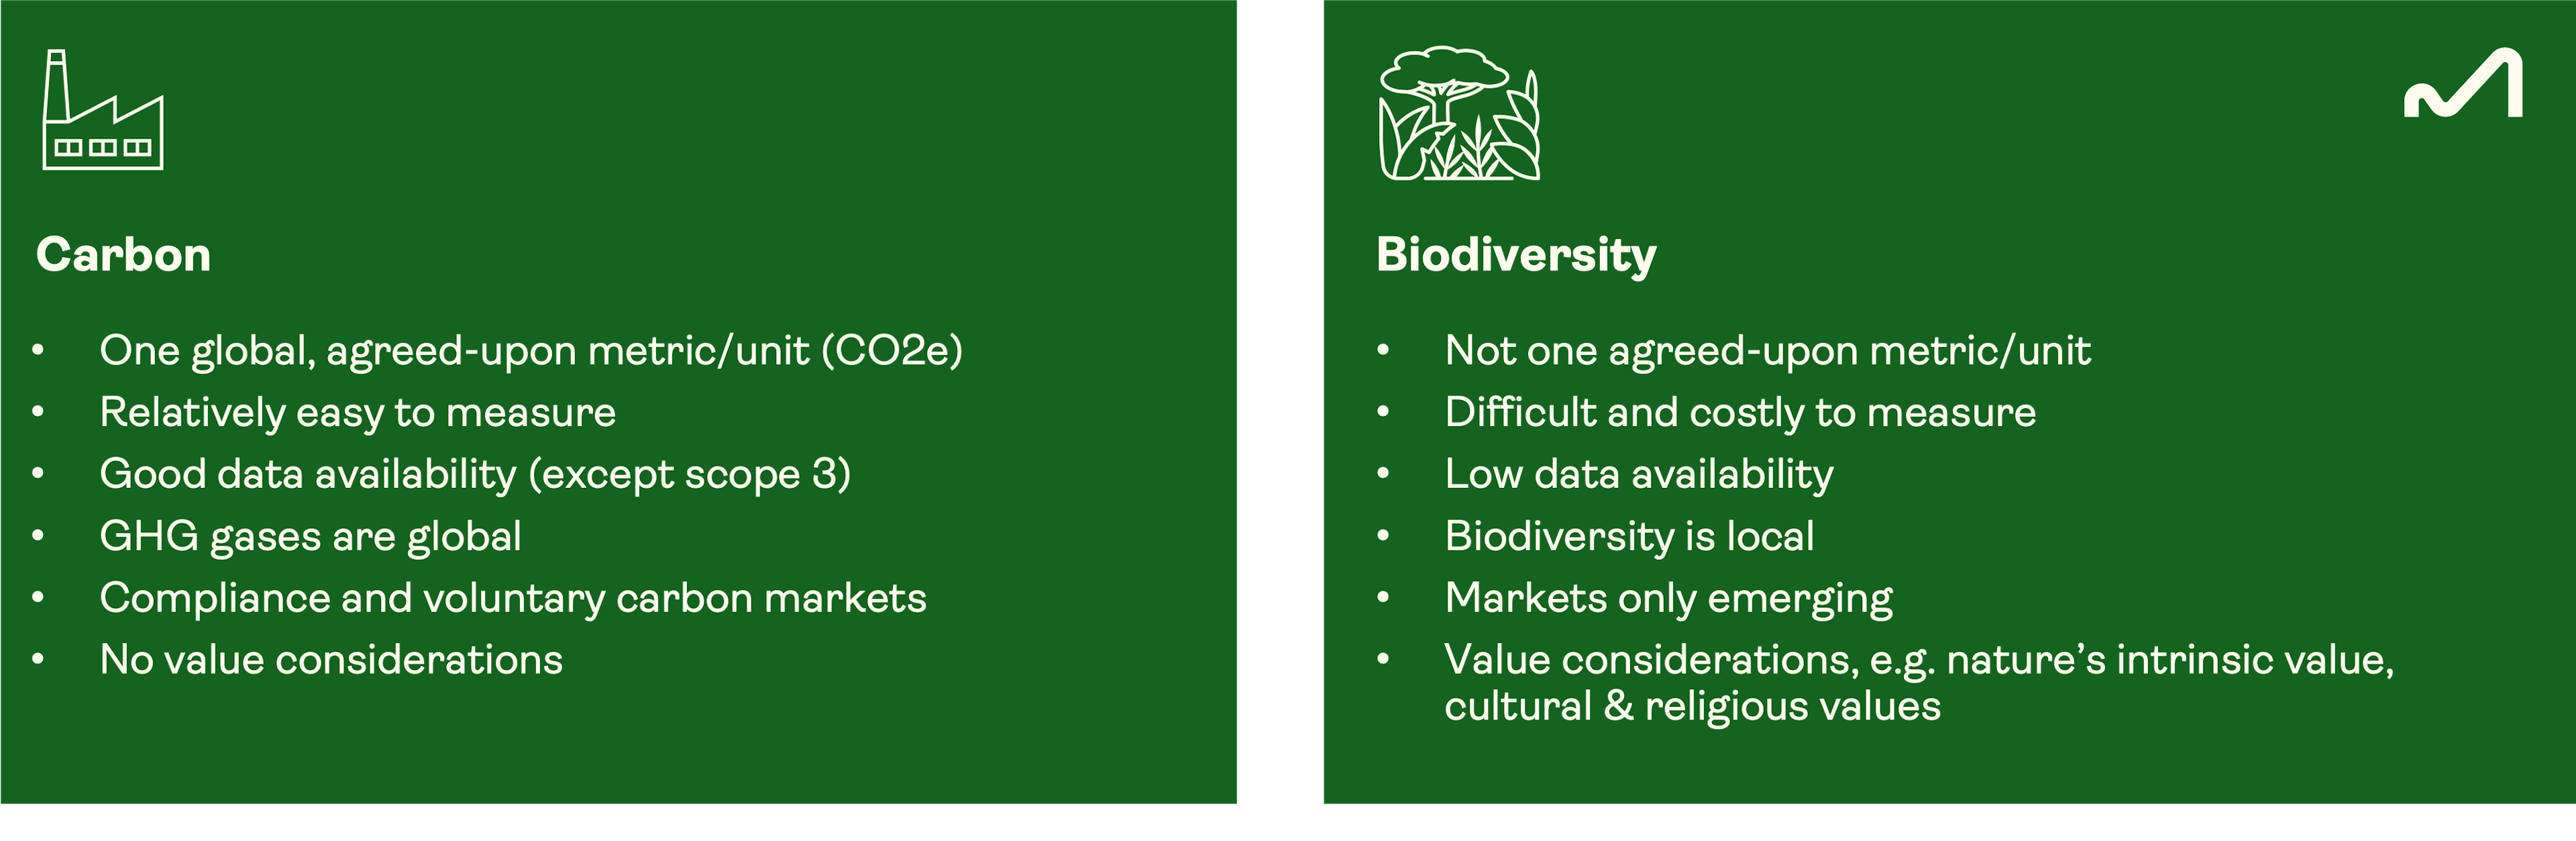 Impaktly Guide: Carbon Reporting vs Biodiversity Reporting